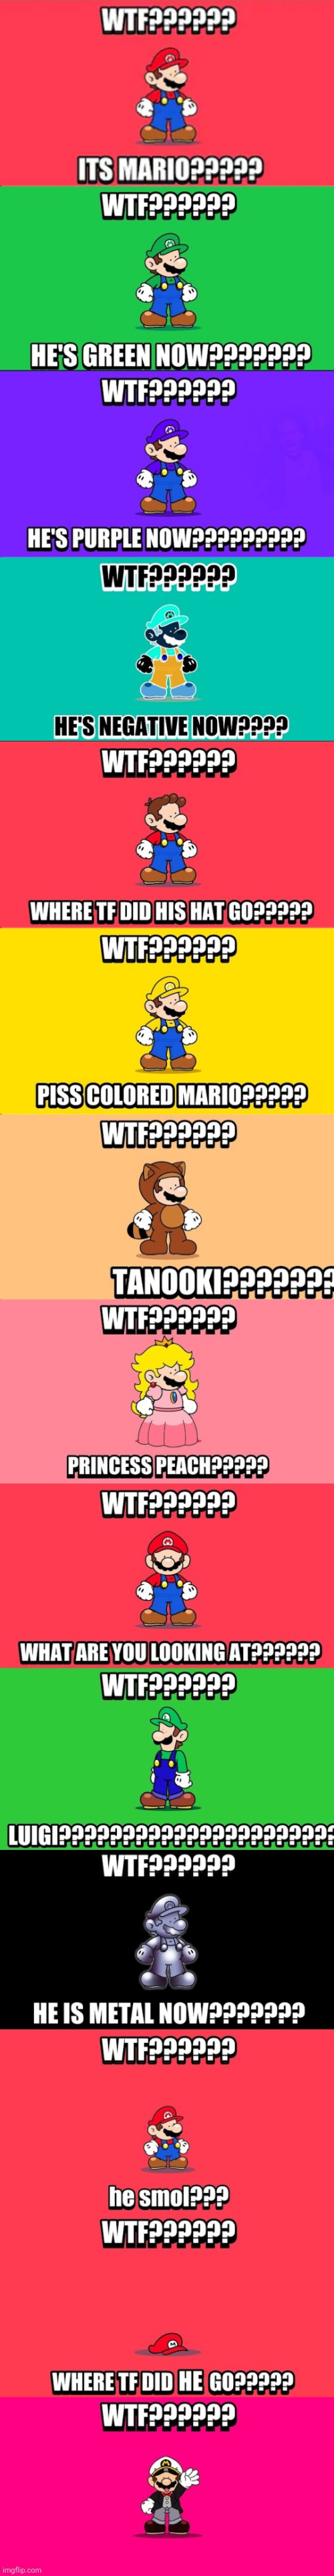 WTF?????? | image tagged in funny,memes,mario,wtf | made w/ Imgflip meme maker